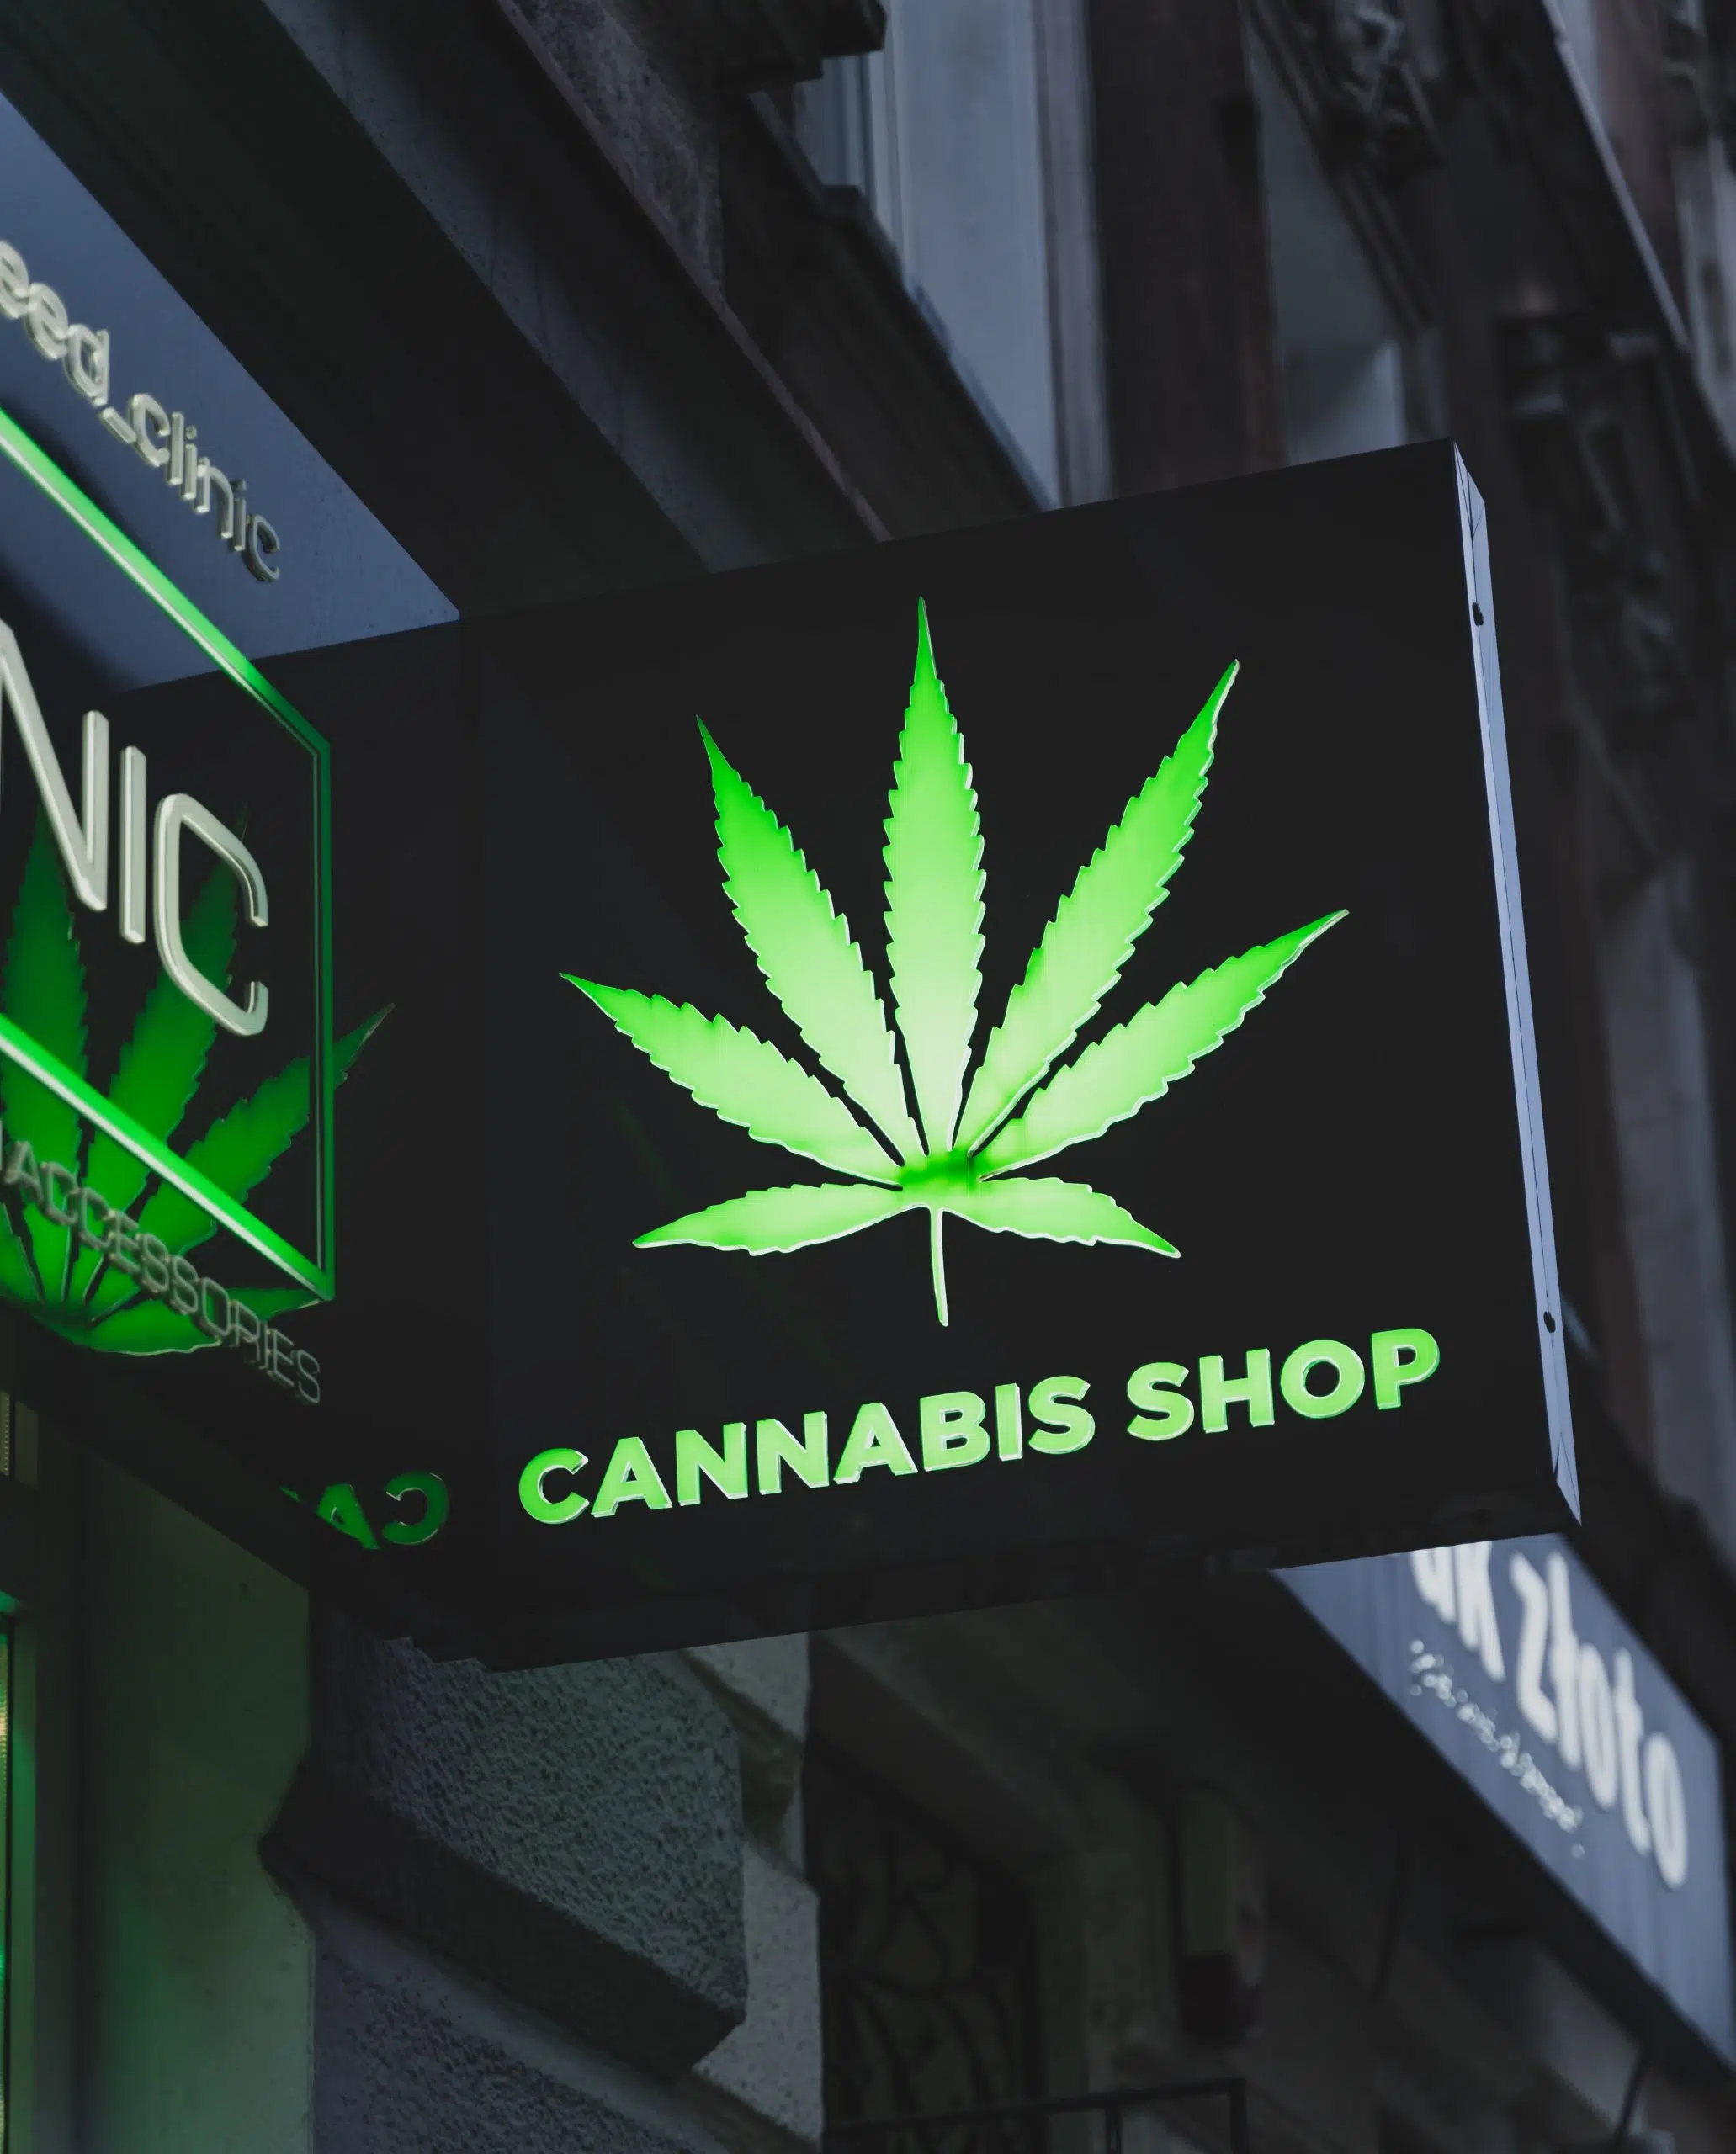 Delegation Seeks Centre Wellington to Opt In to Allow Legal Cannabis Stores